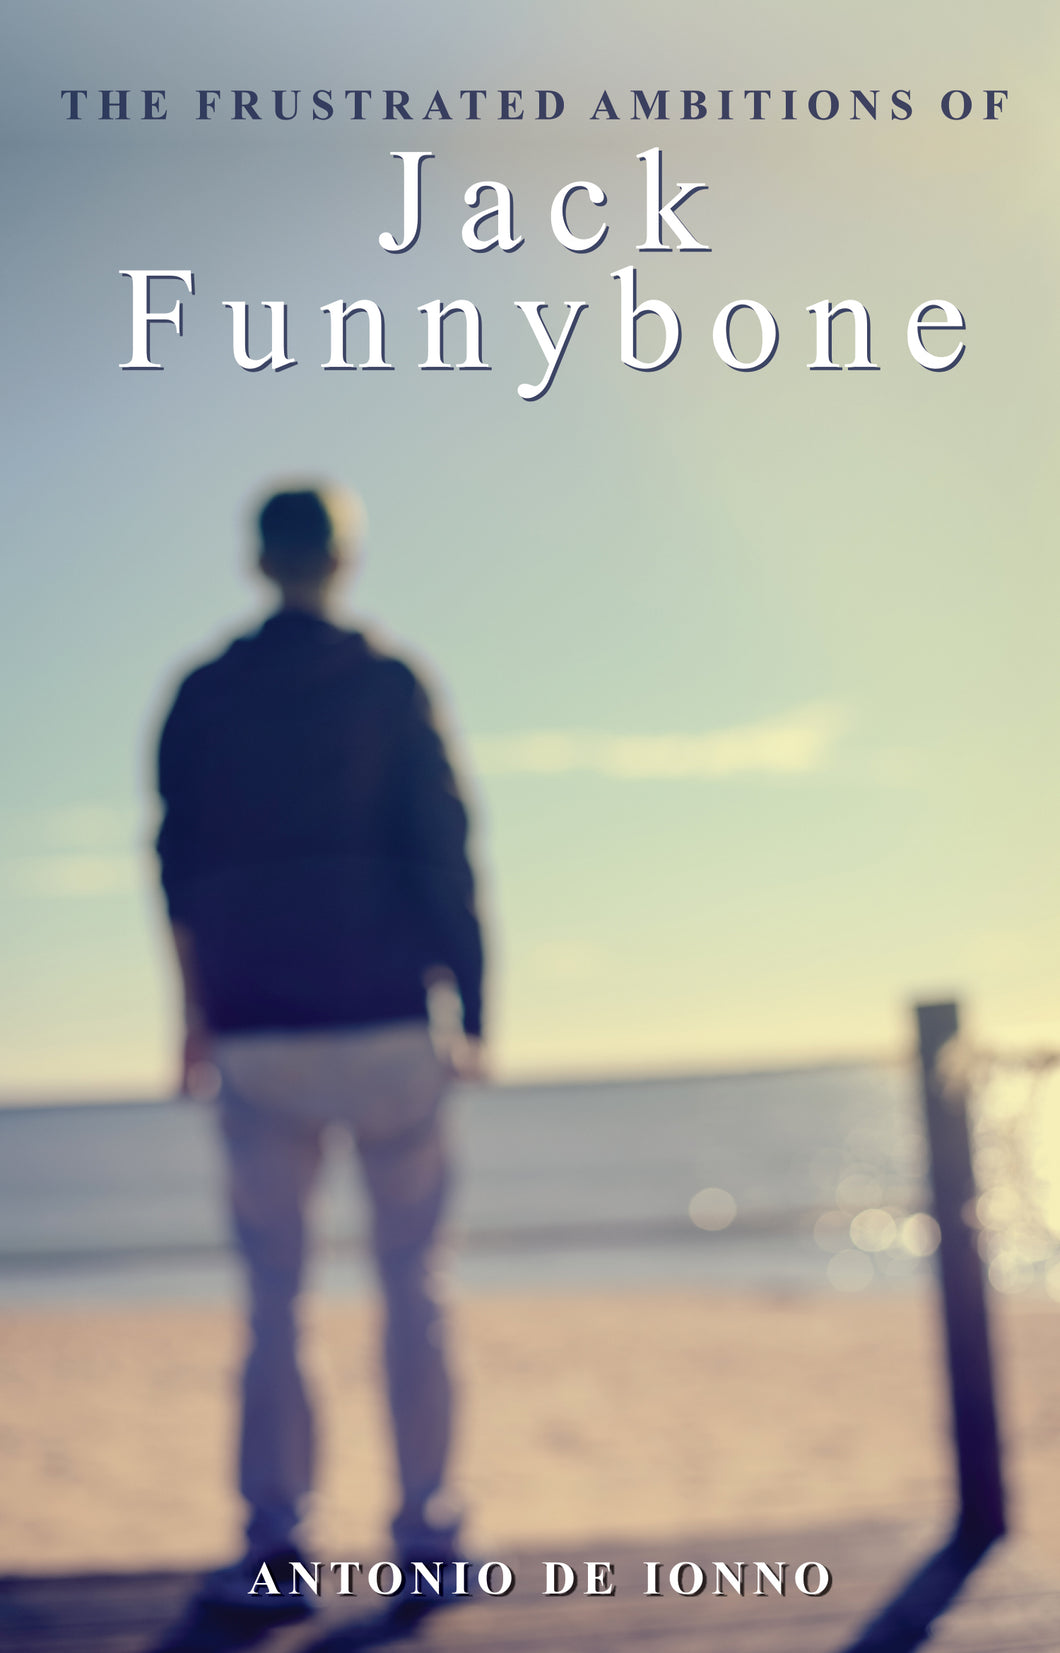 The Frustrated Ambitions of Jack Funnybone